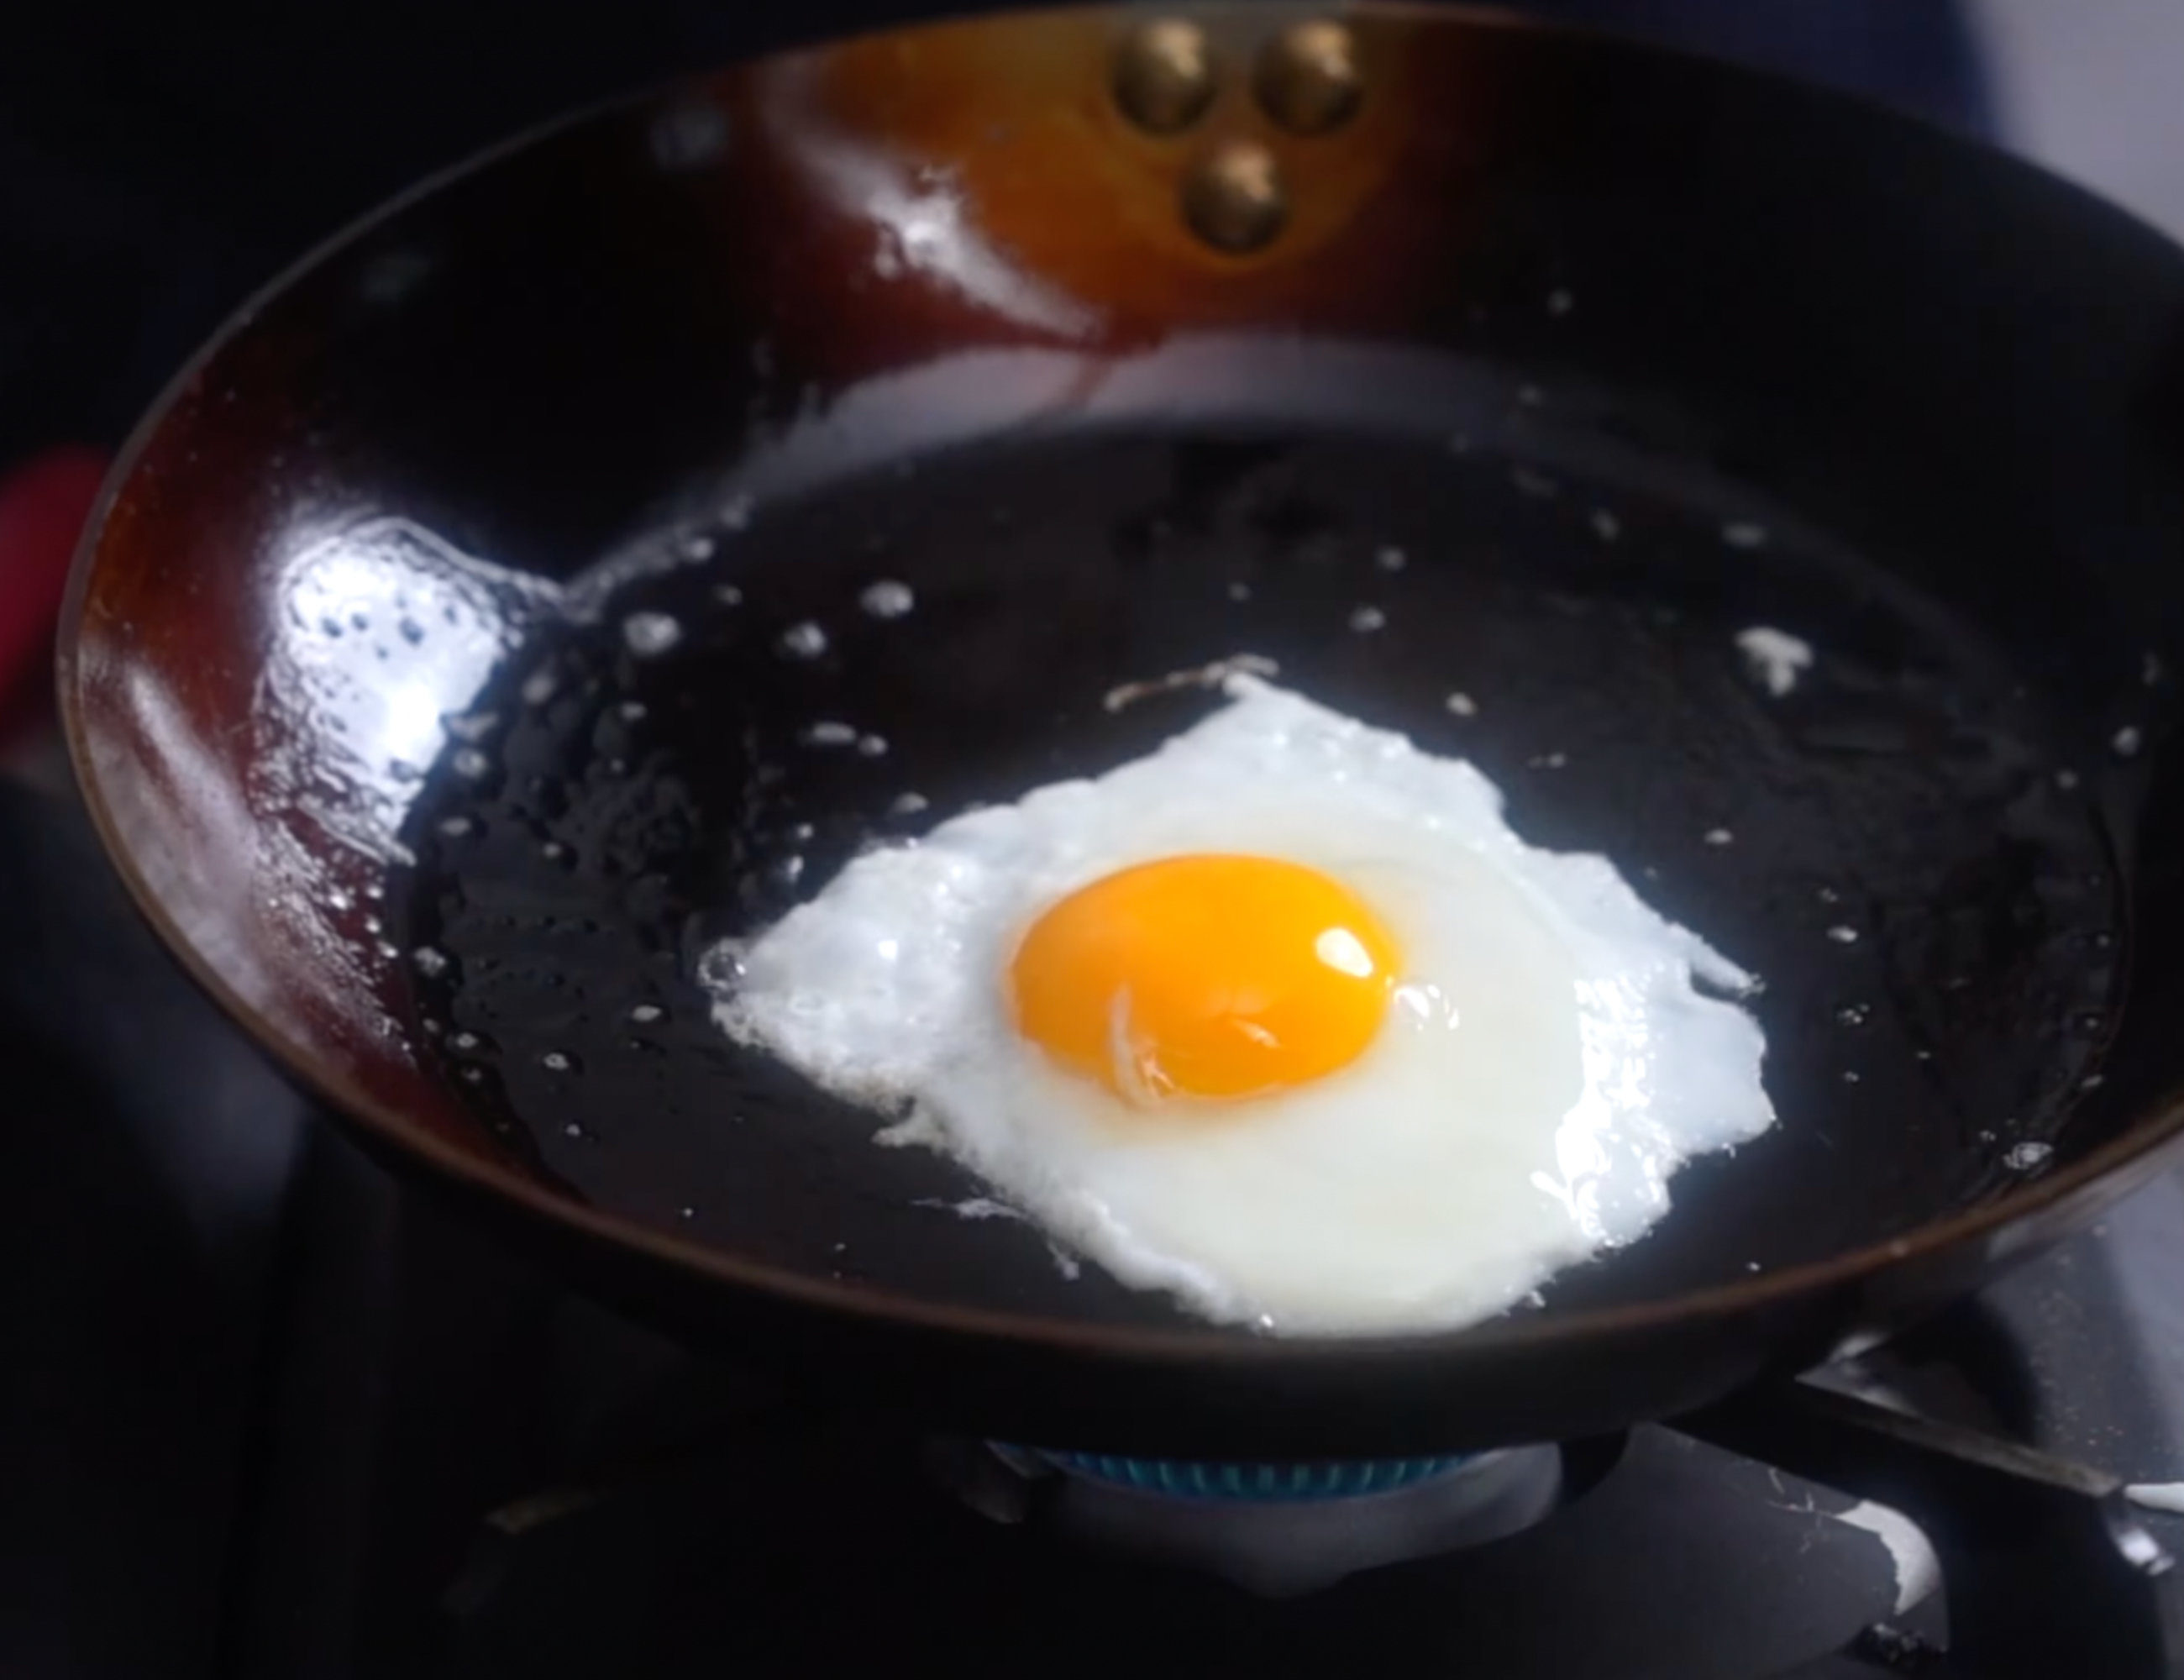 IN-DEPTH: Exactly How to Slide an Egg in a Carbon Steel Skillet